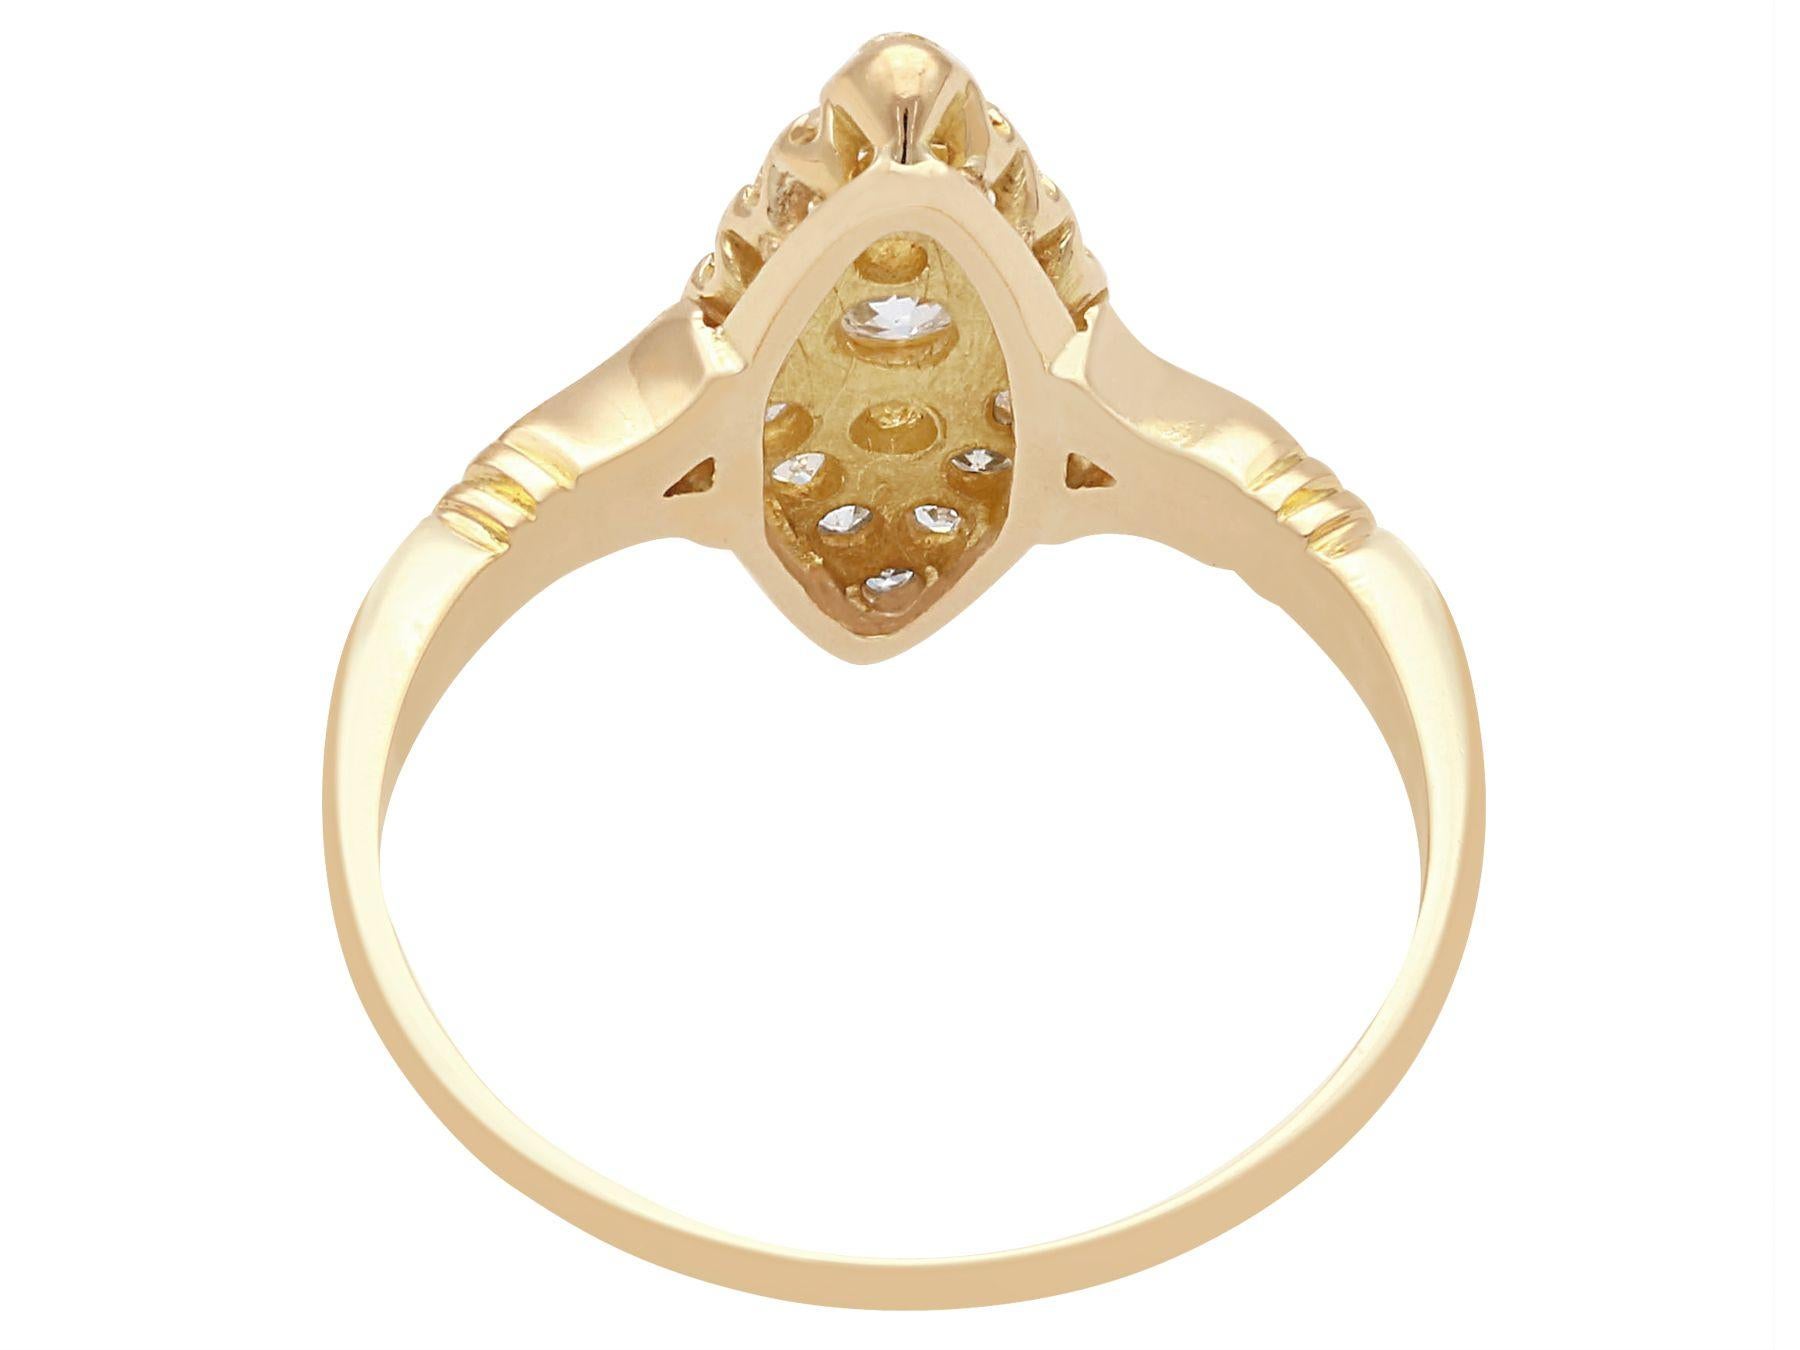 1910s Diamond and Yellow Gold Marquise Ring In Excellent Condition For Sale In Jesmond, Newcastle Upon Tyne